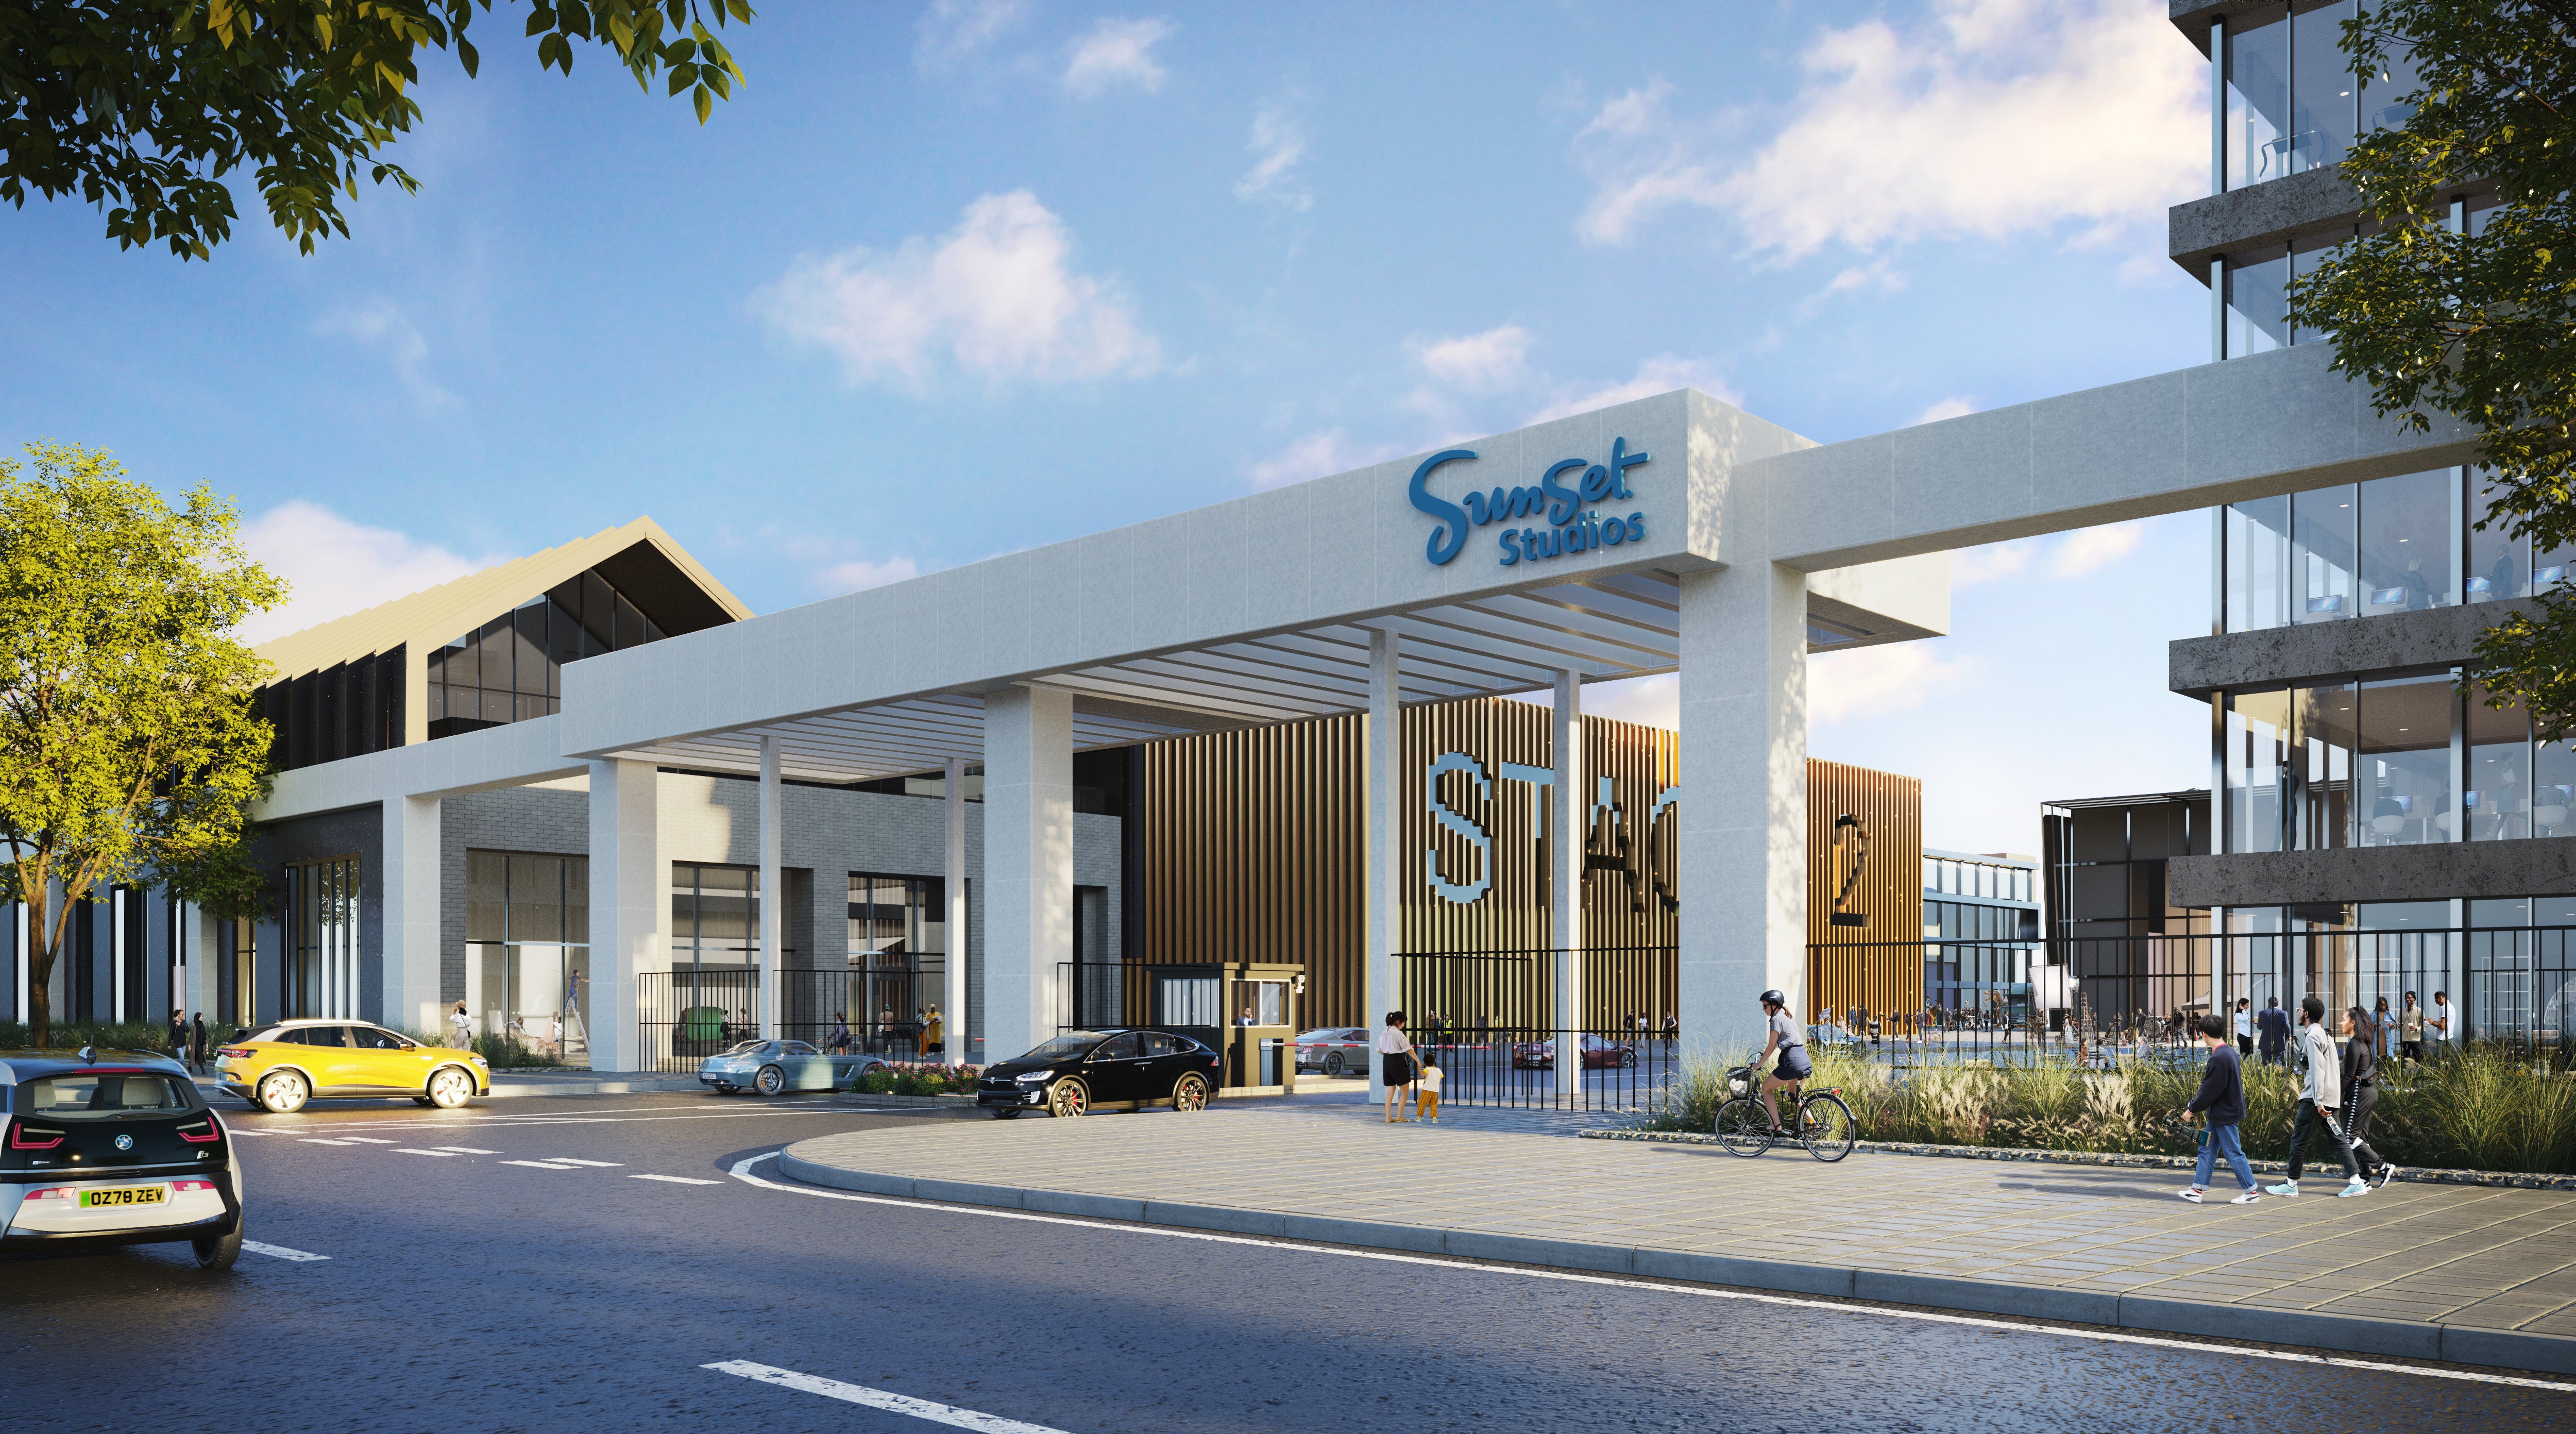 An artist’s impression of the proposed Sunset Studios site planned in Hertfordshire (Blackstone/PA)